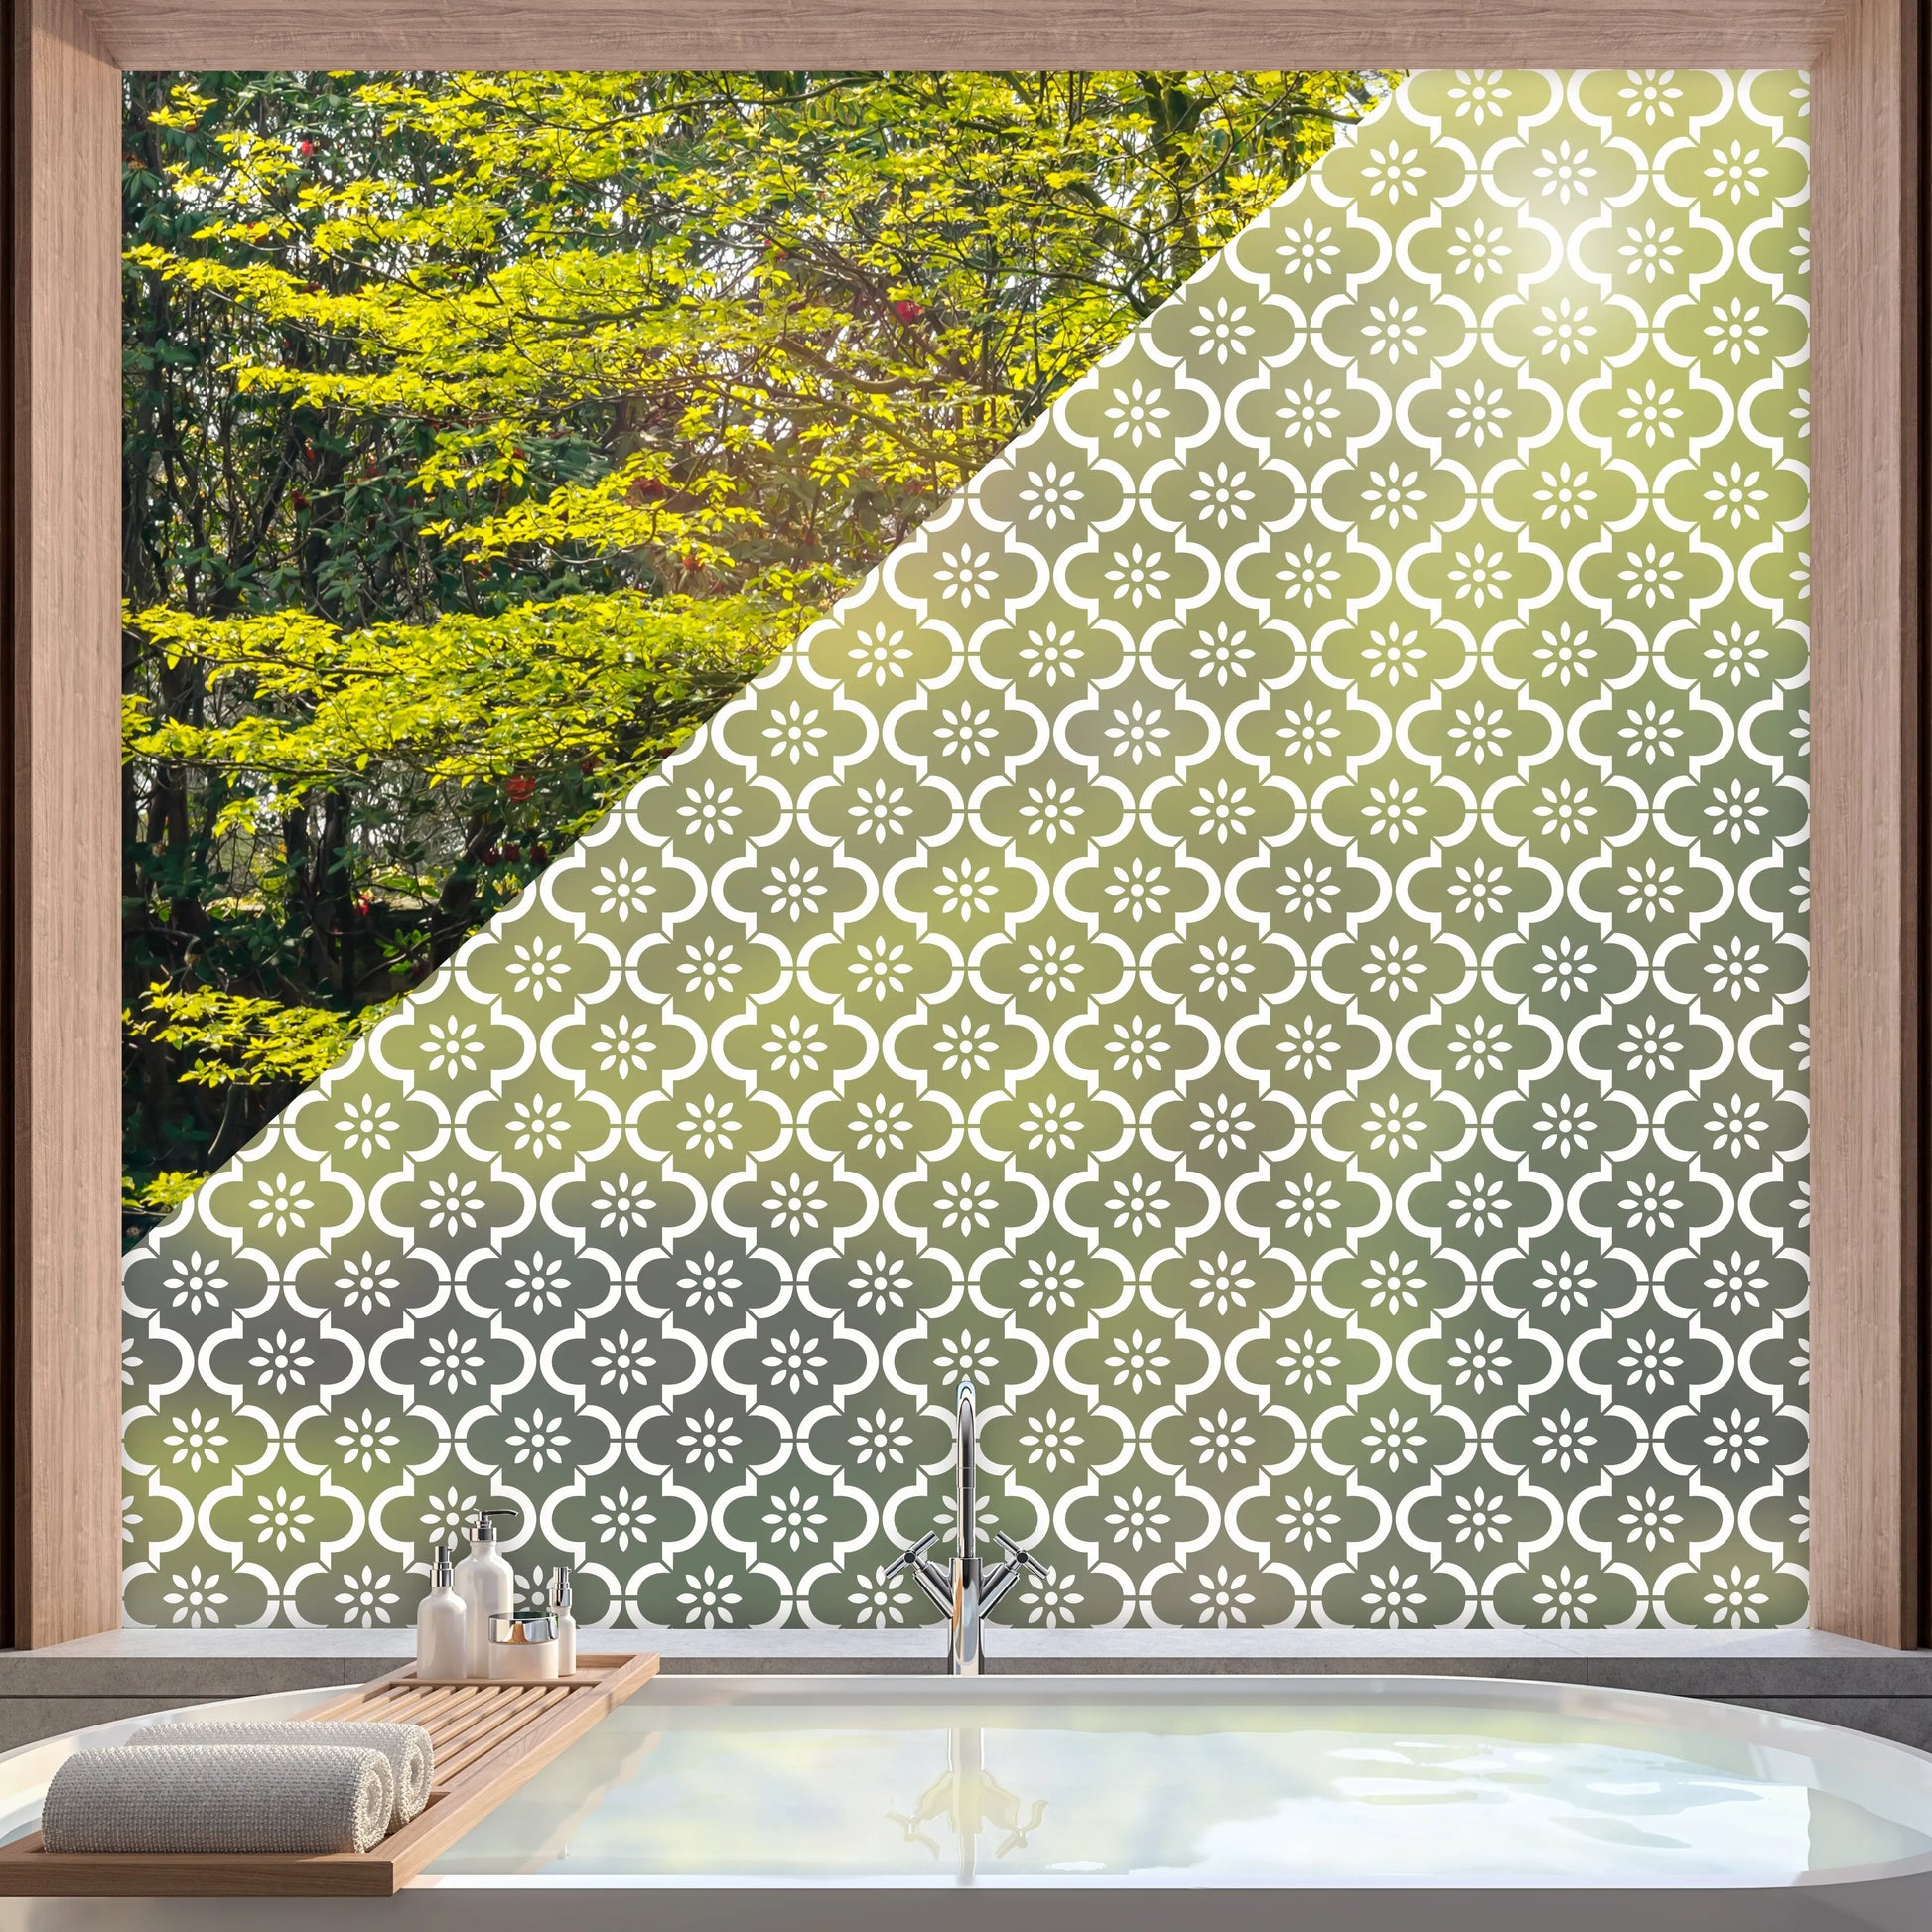 Privacy Window Jannah Frosted Window Privacy Panel Dizzy Duck Designs